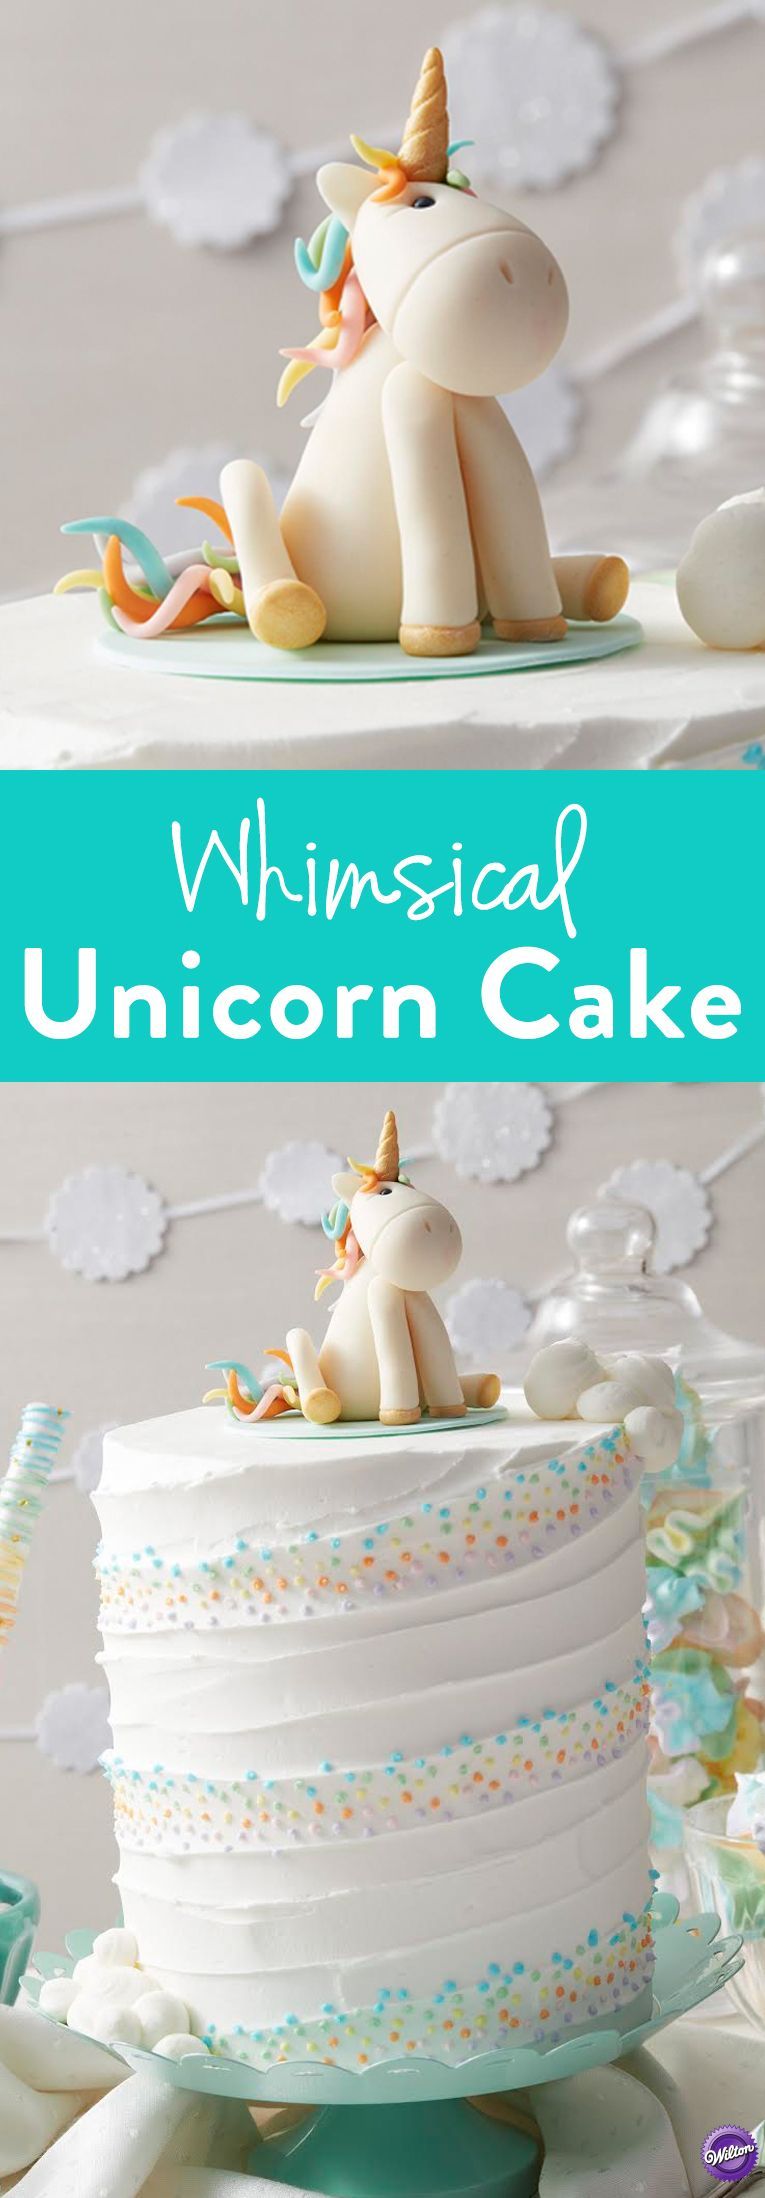 How to Make a Whimsical Unicorn Cake – Learn how to make this adorable…